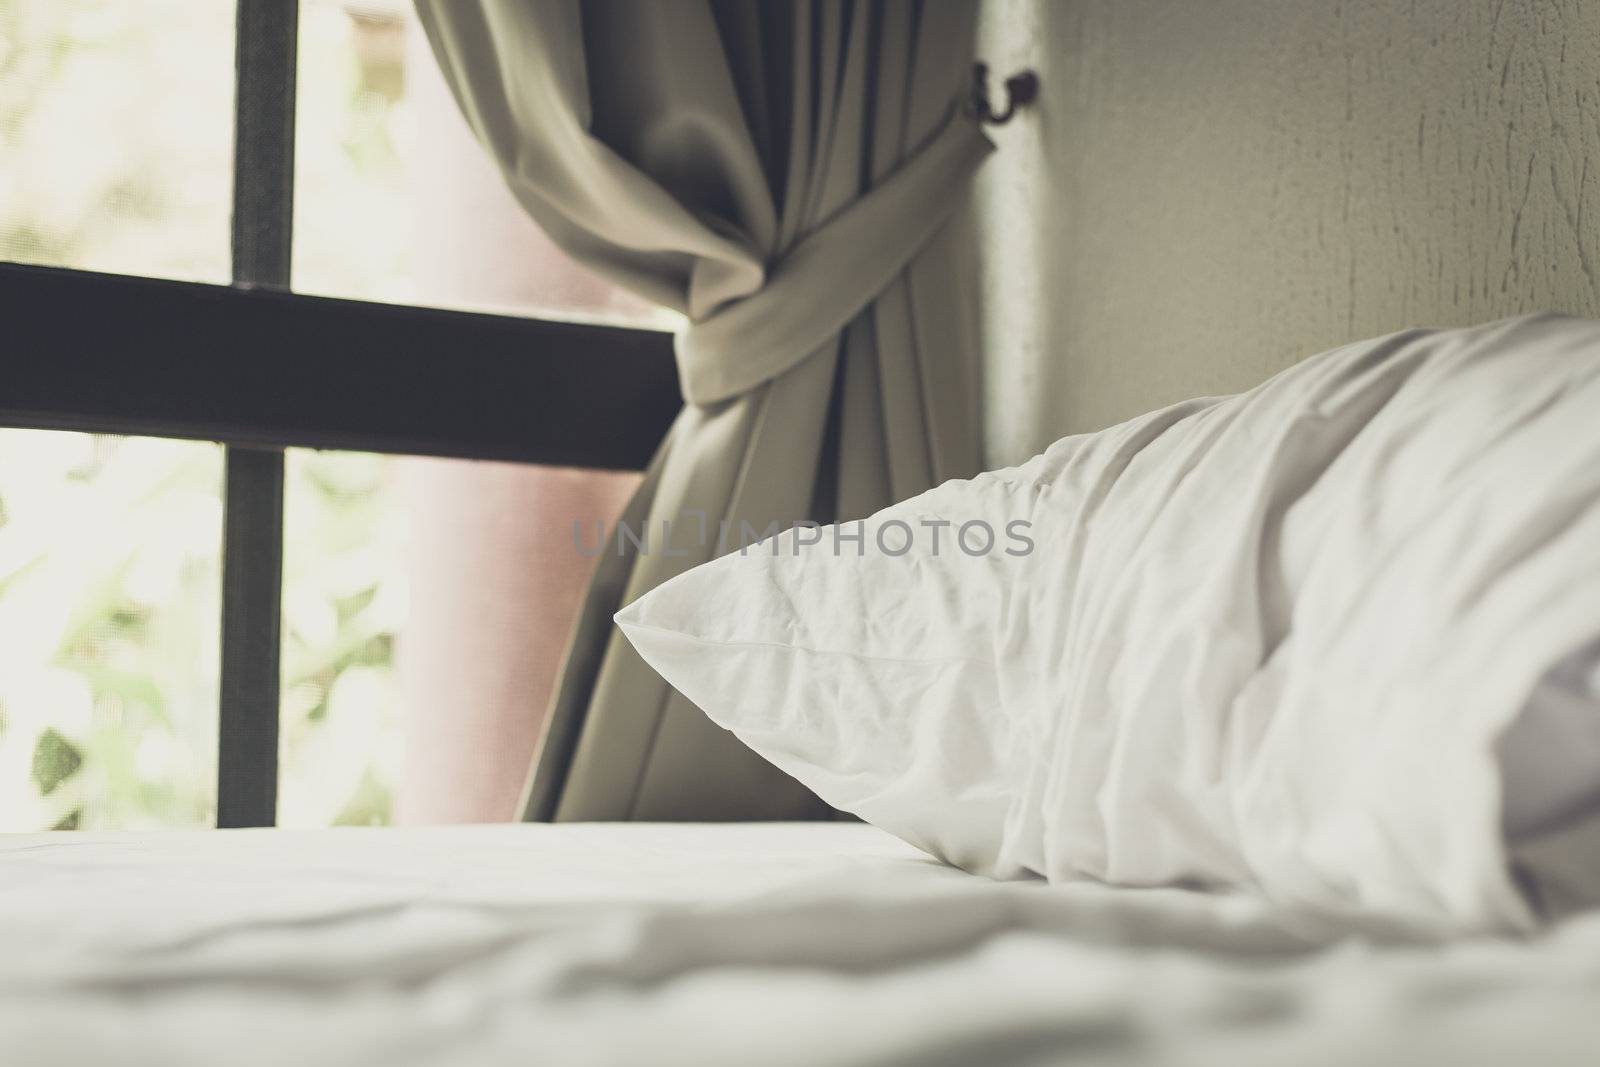 white pillow on bed in room in morning time process photo in retro style